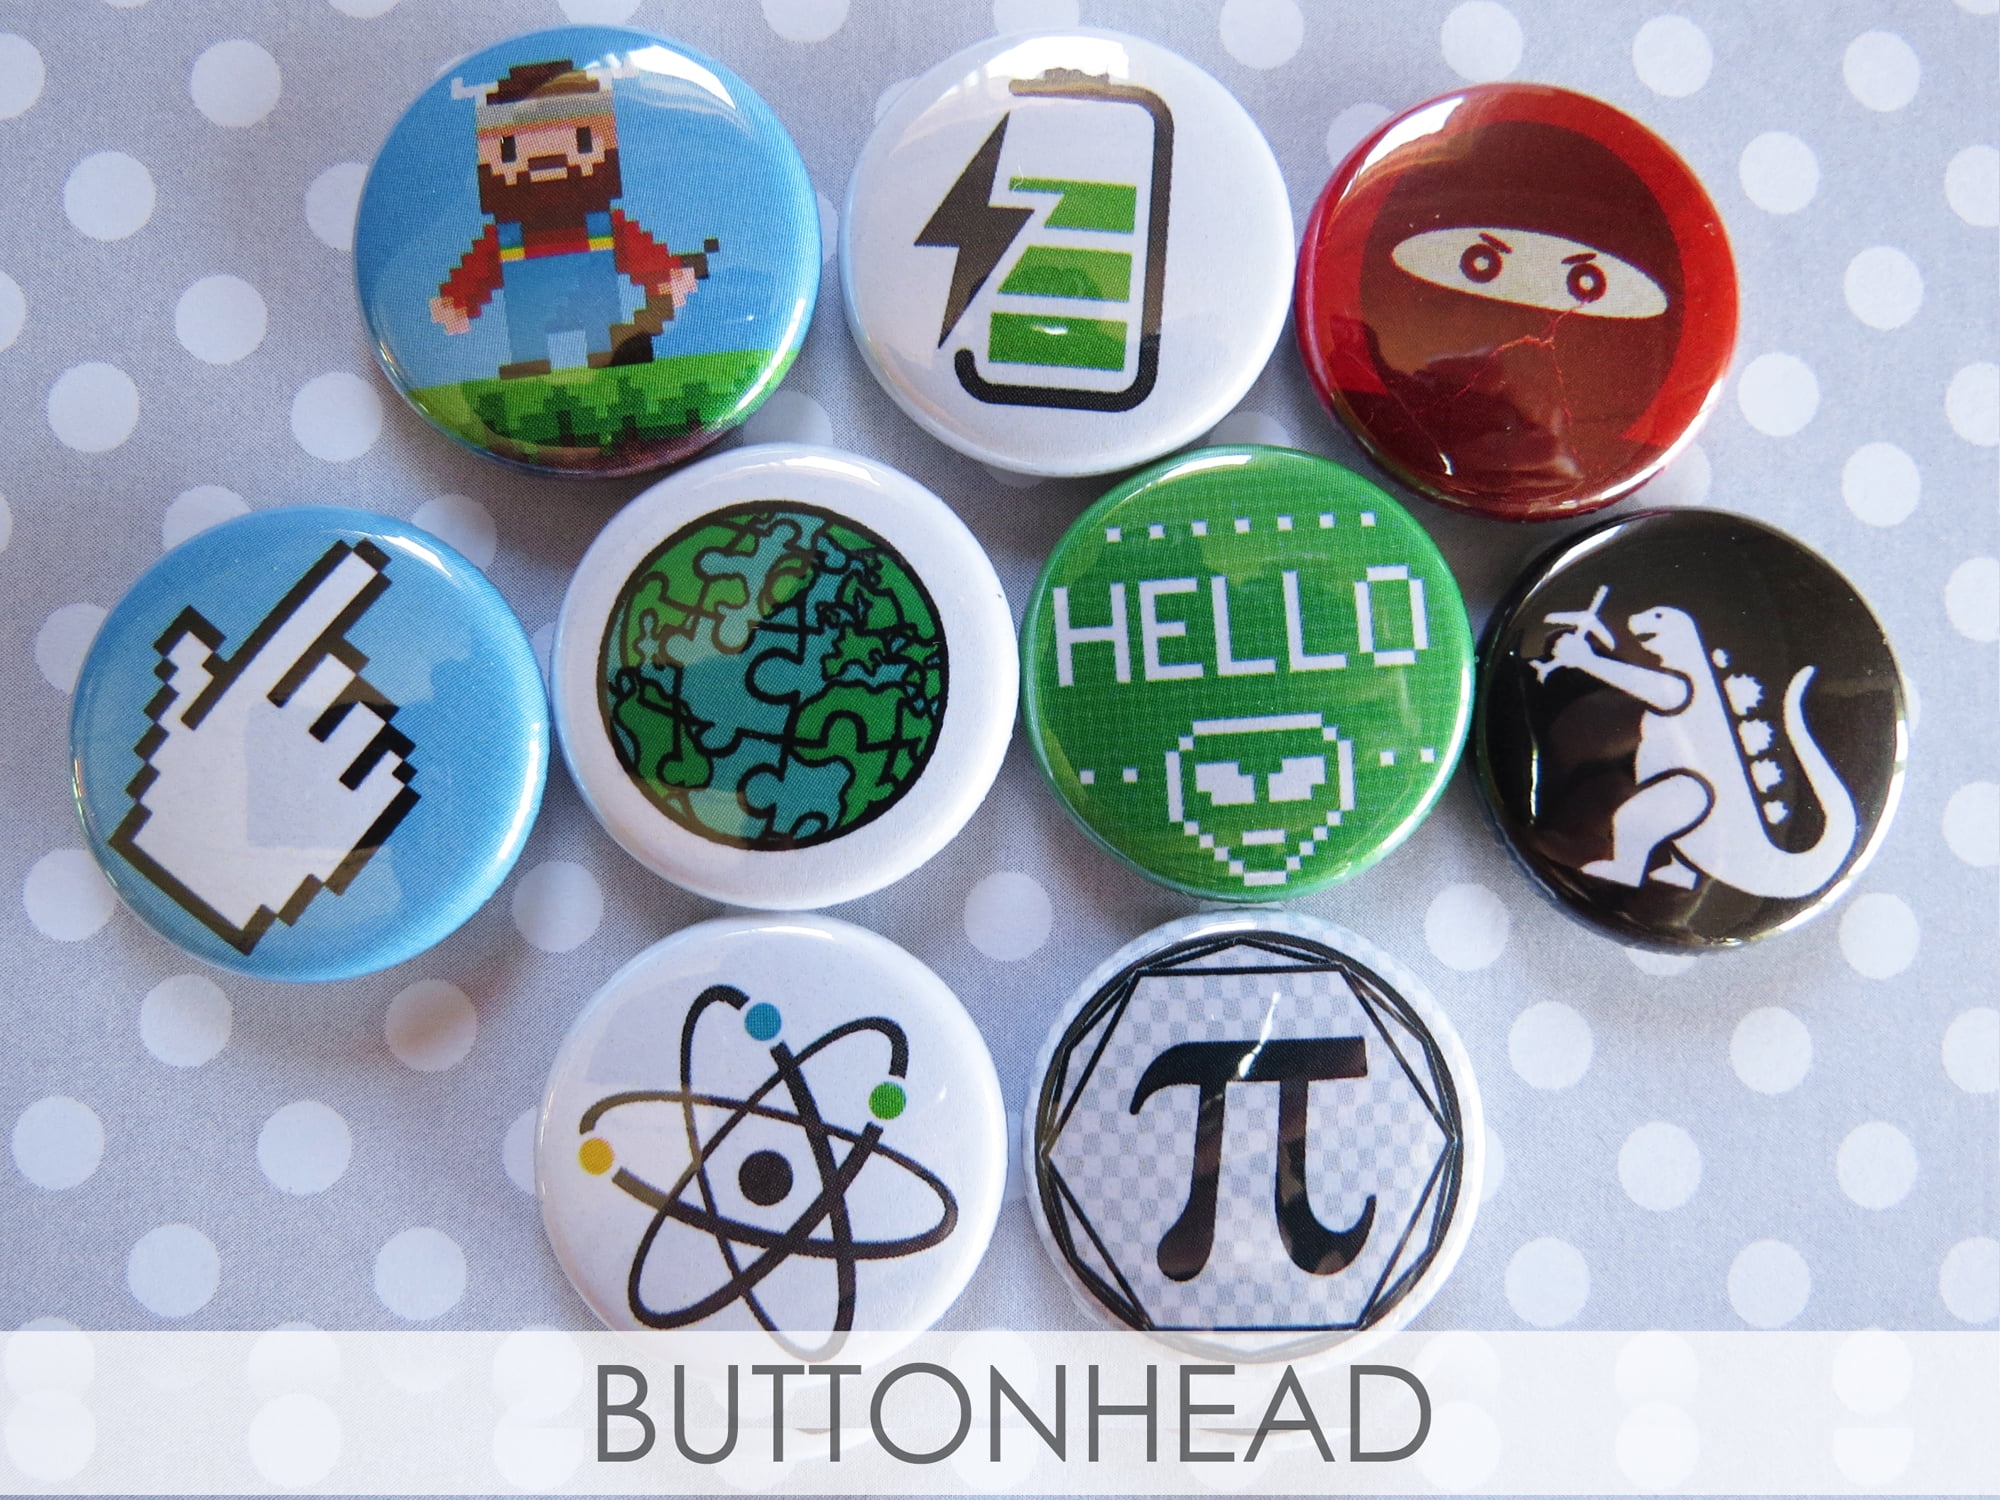 Pin on Geeky  Everything and Anything